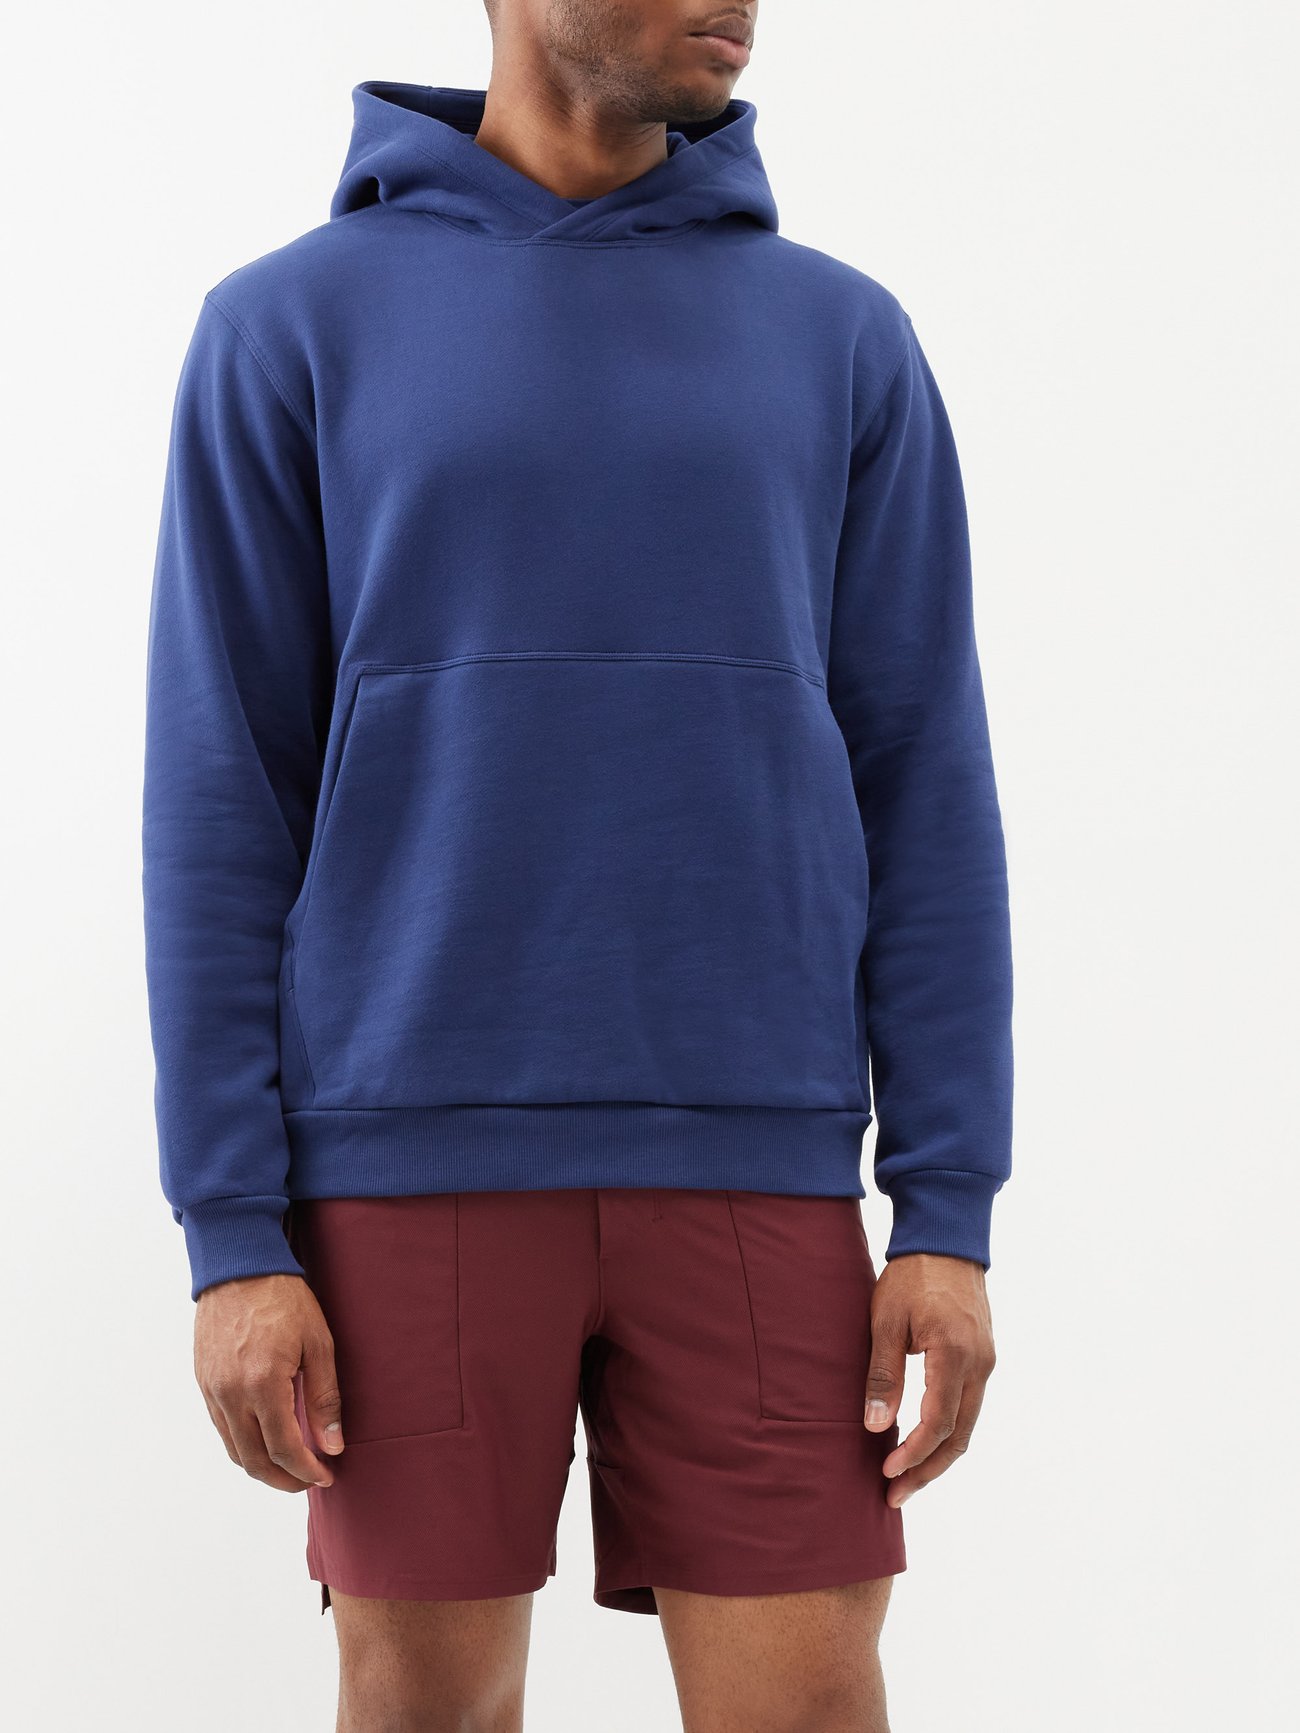 Steady State Pullover Hoodie *Graphic